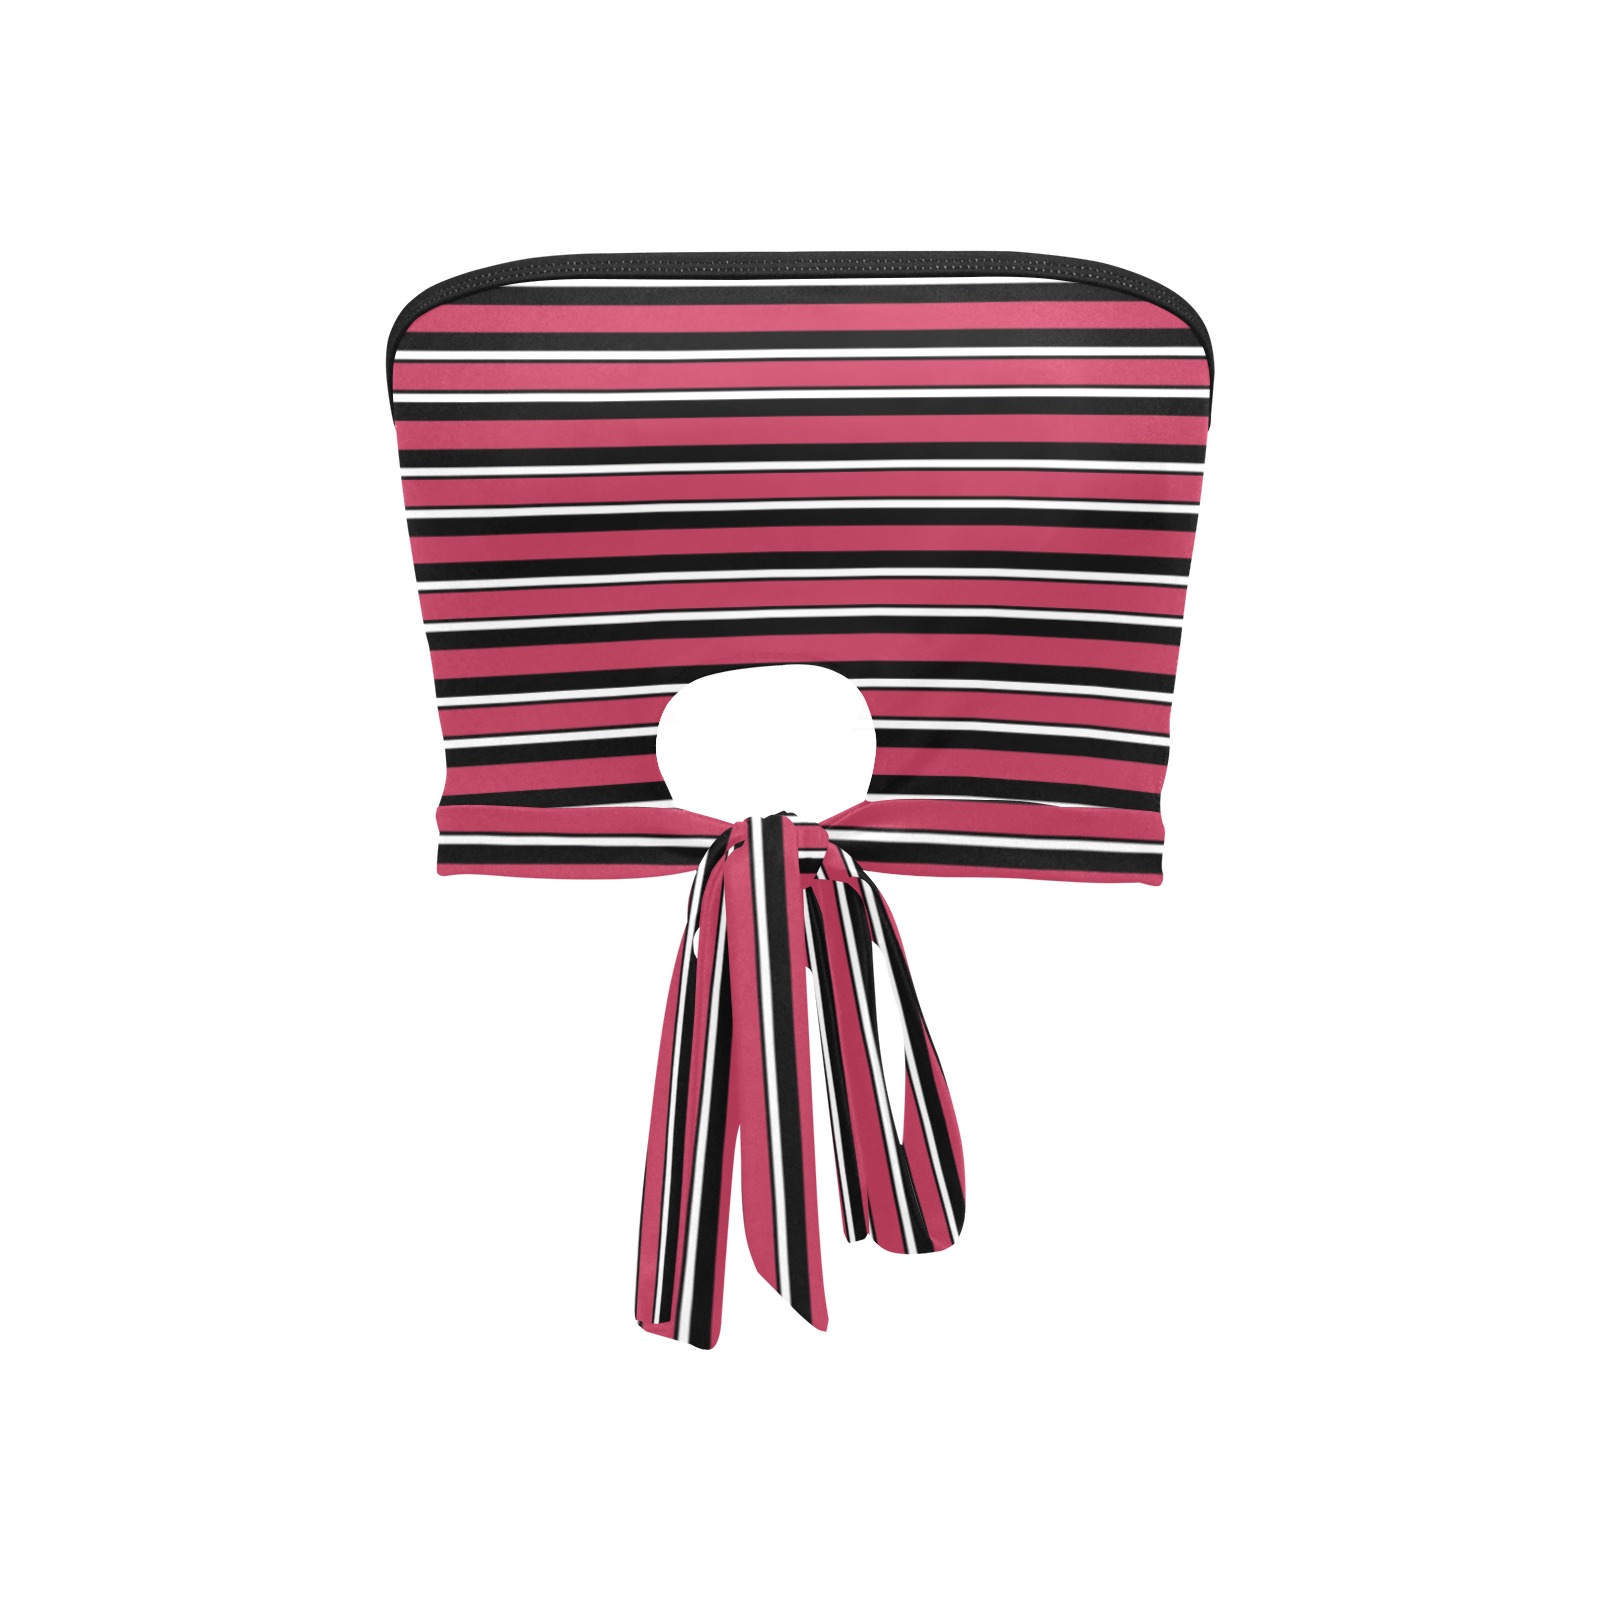 Magenta, Black and White Stripes Women's Tie Bandeau Top (Model T66)